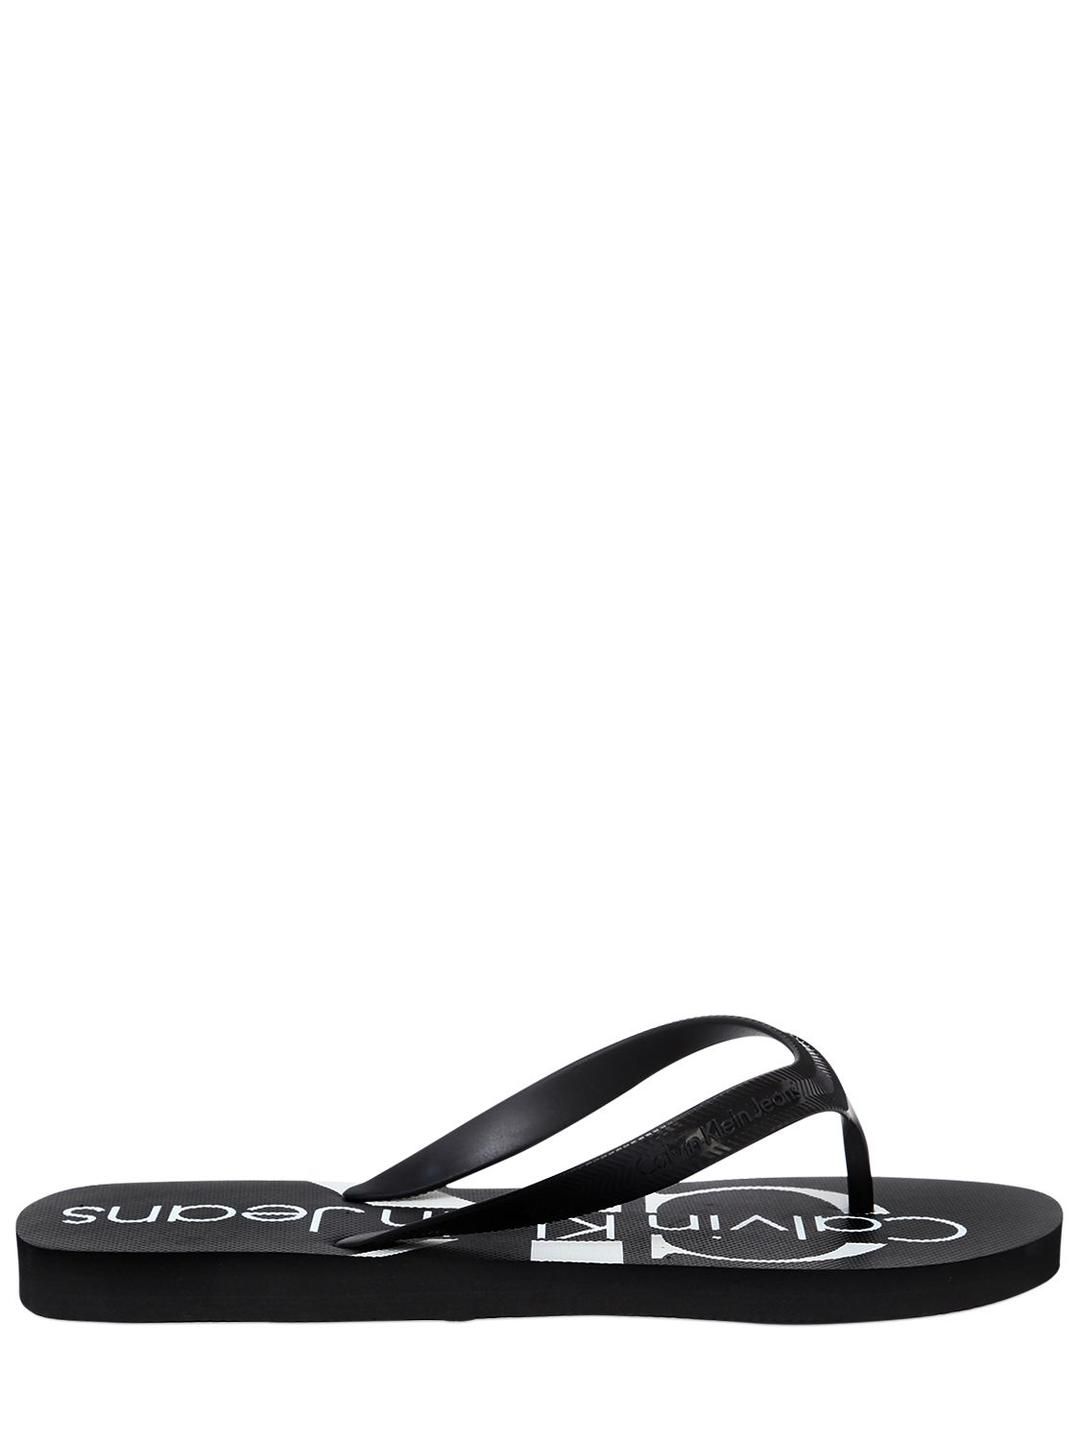 Shop the Most Stylish Flip-Flops | Who What Wear